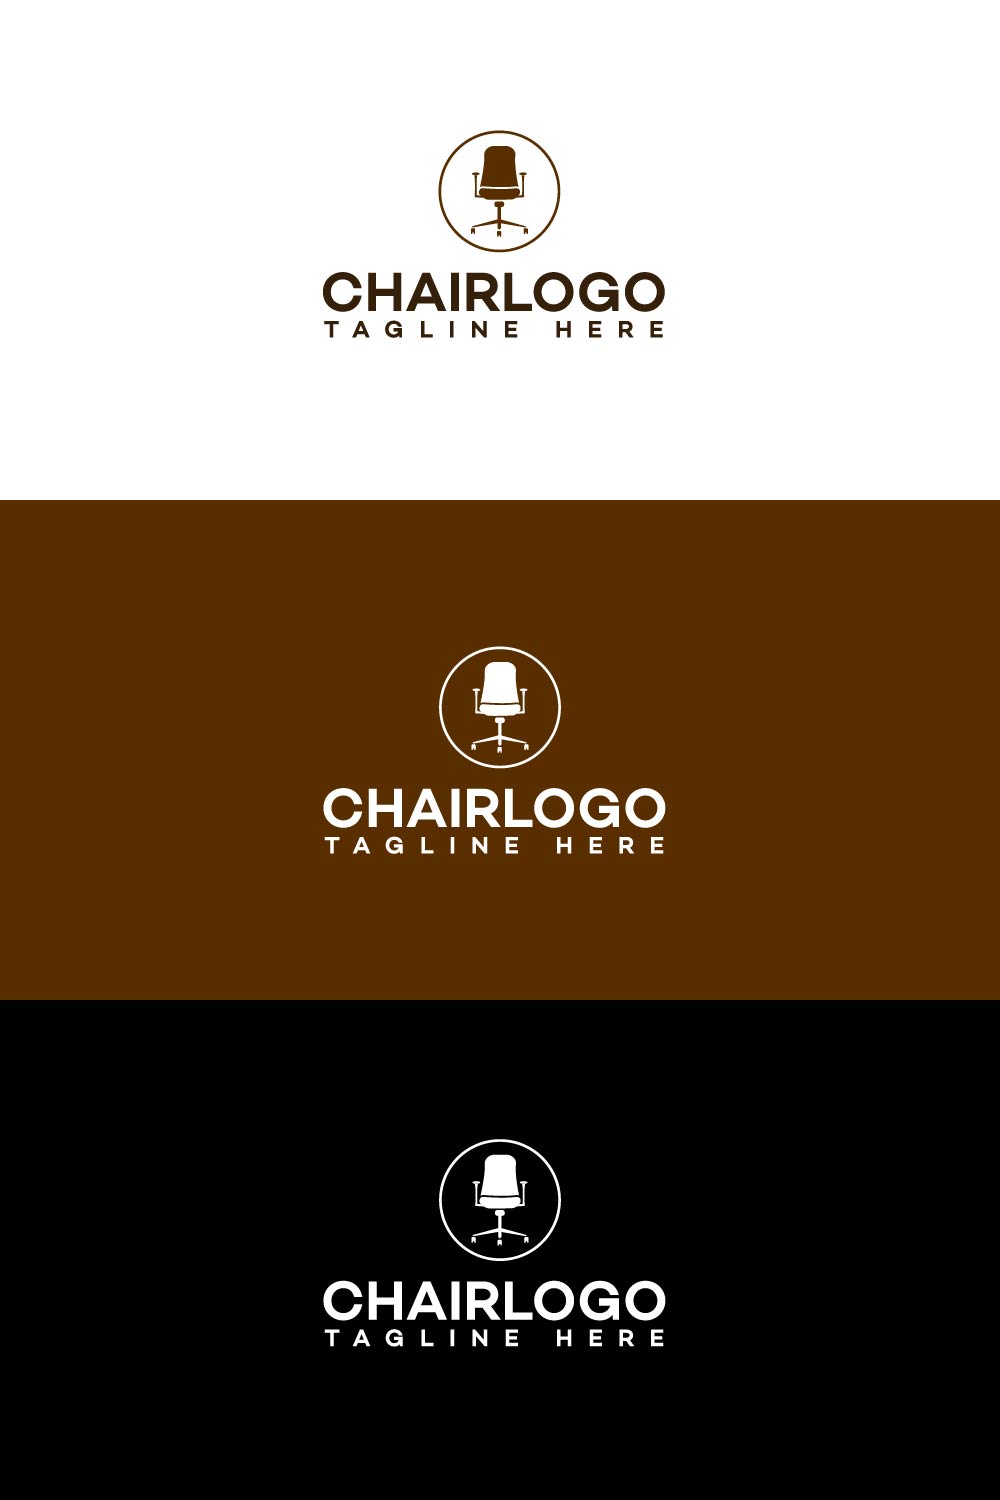 Chair Logo Template Pinterest Collage image.